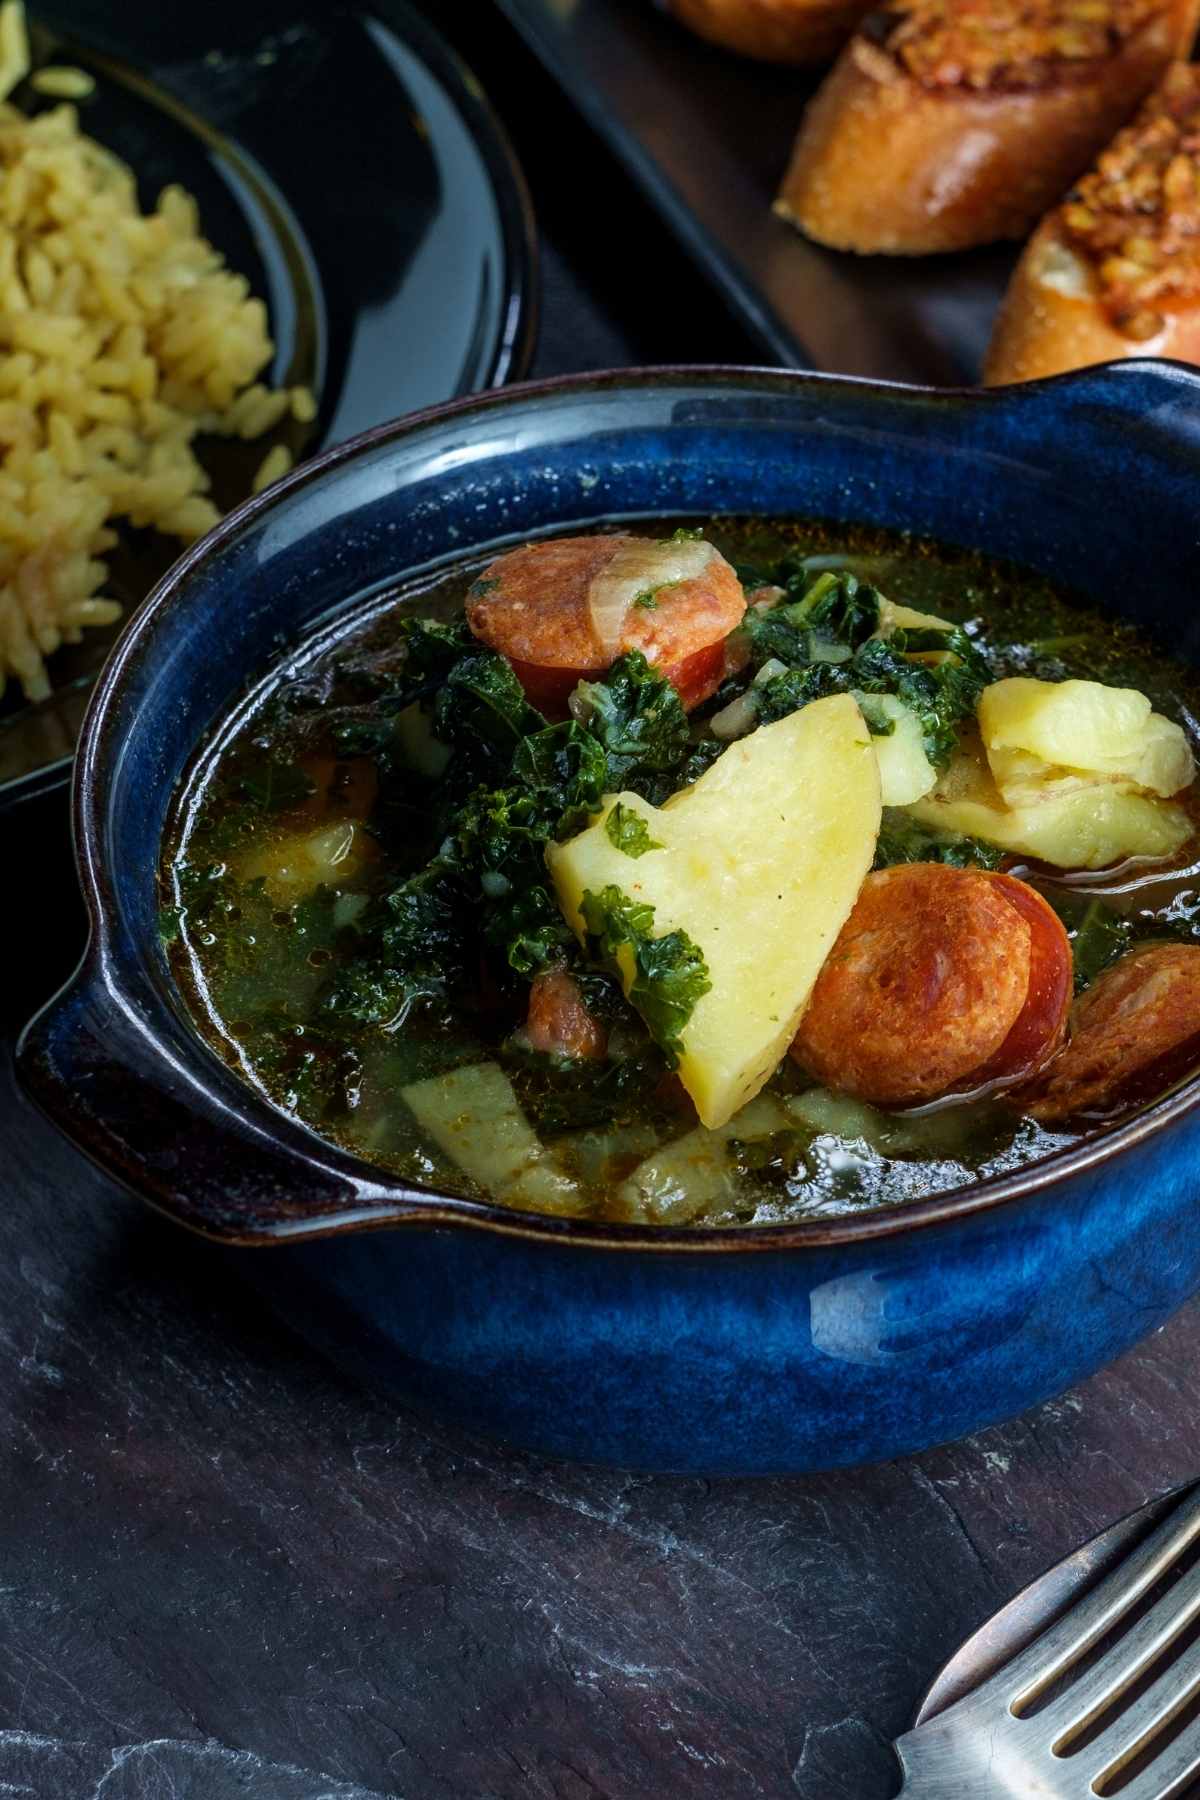 Caldo Verde is a simple but hearty soup from Portugal. It’s made with linguica, a smoked cured pork sausage flavored with paprika and garlic. It's a delicious and quick meal that is also comforting.